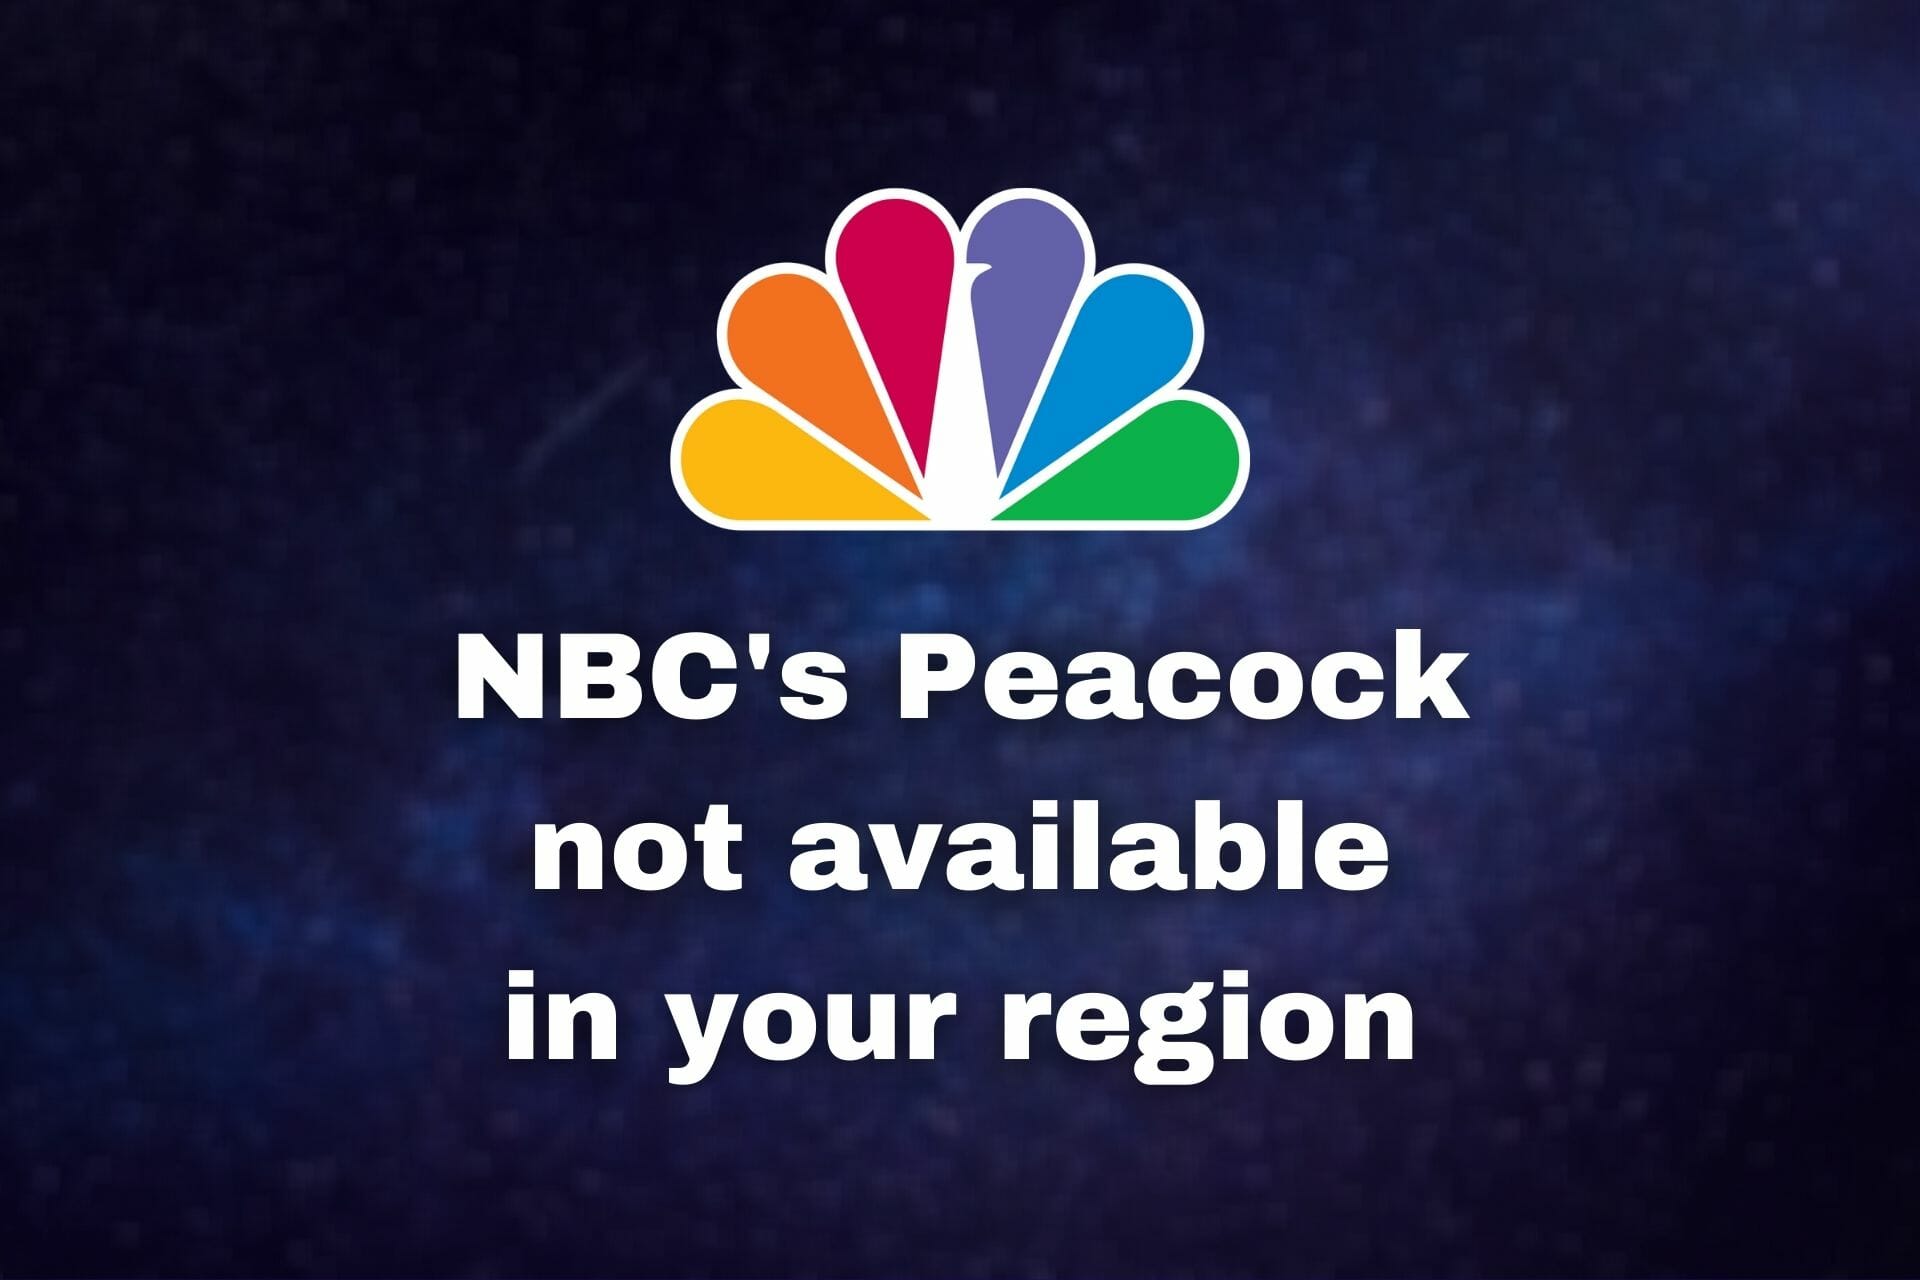 Peacock not available in your region